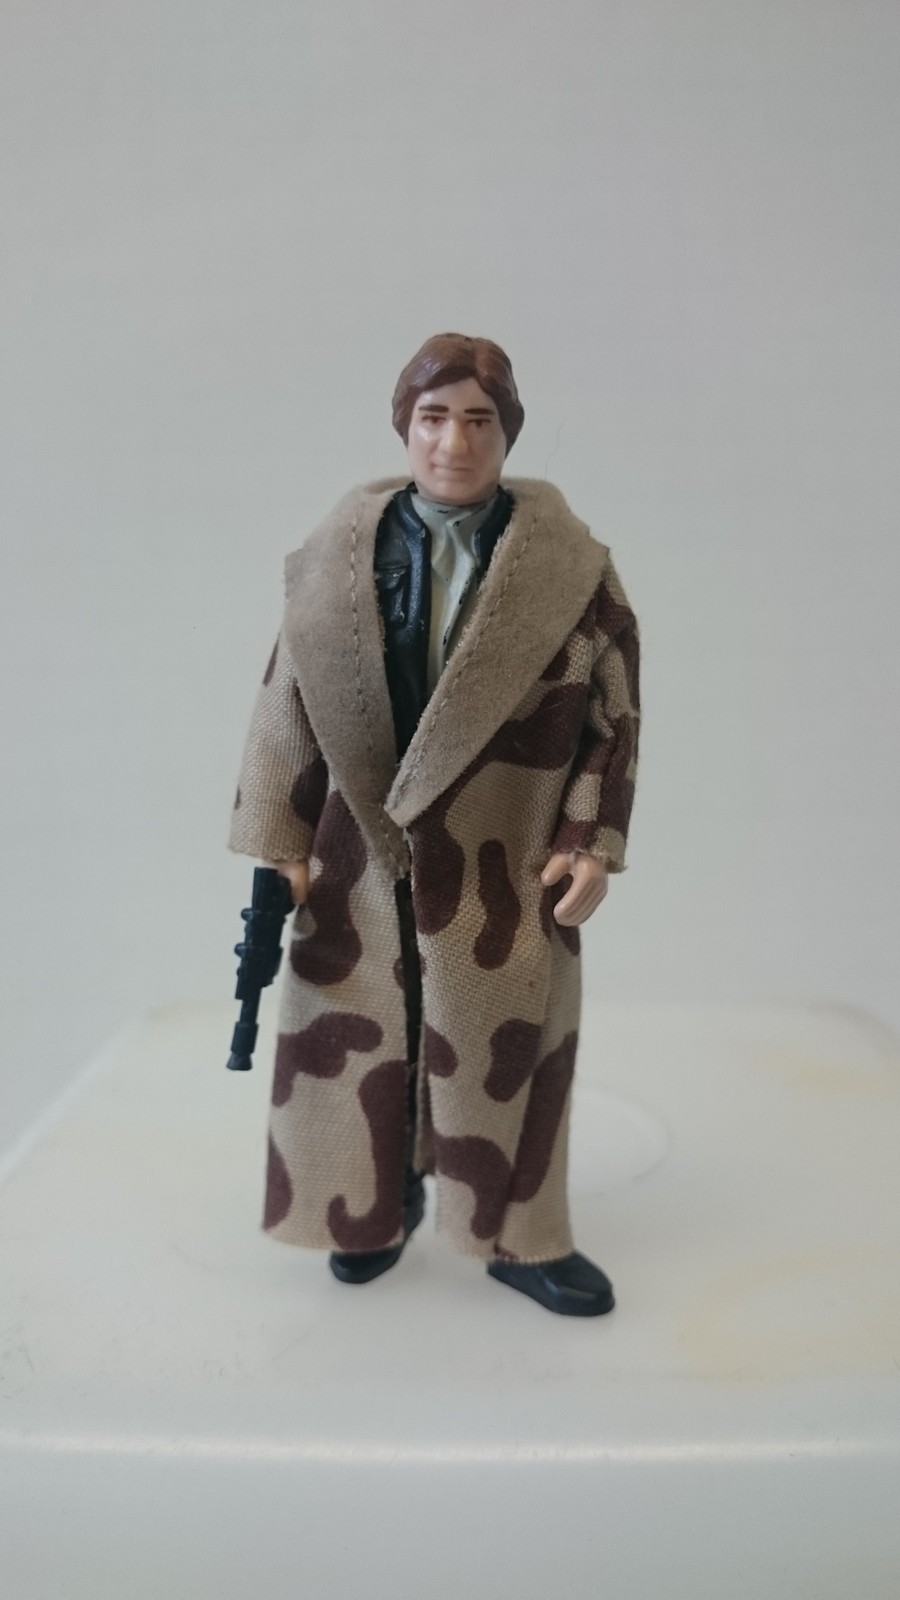 Vintage Star Wars figure "Han Solo in trench coat". Complete.